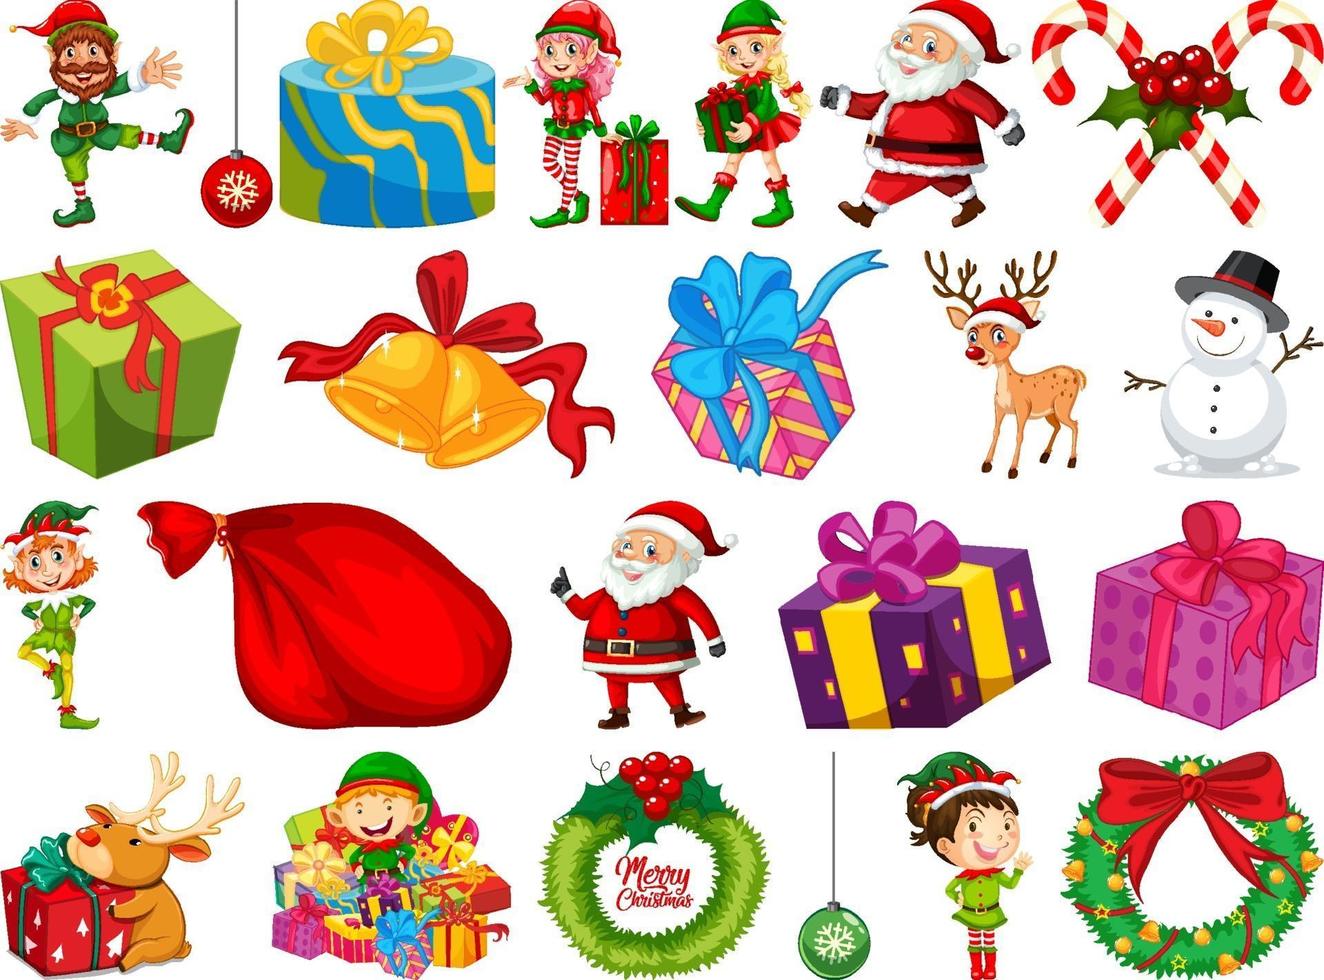 Set of Christmas objects isolated on white background vector